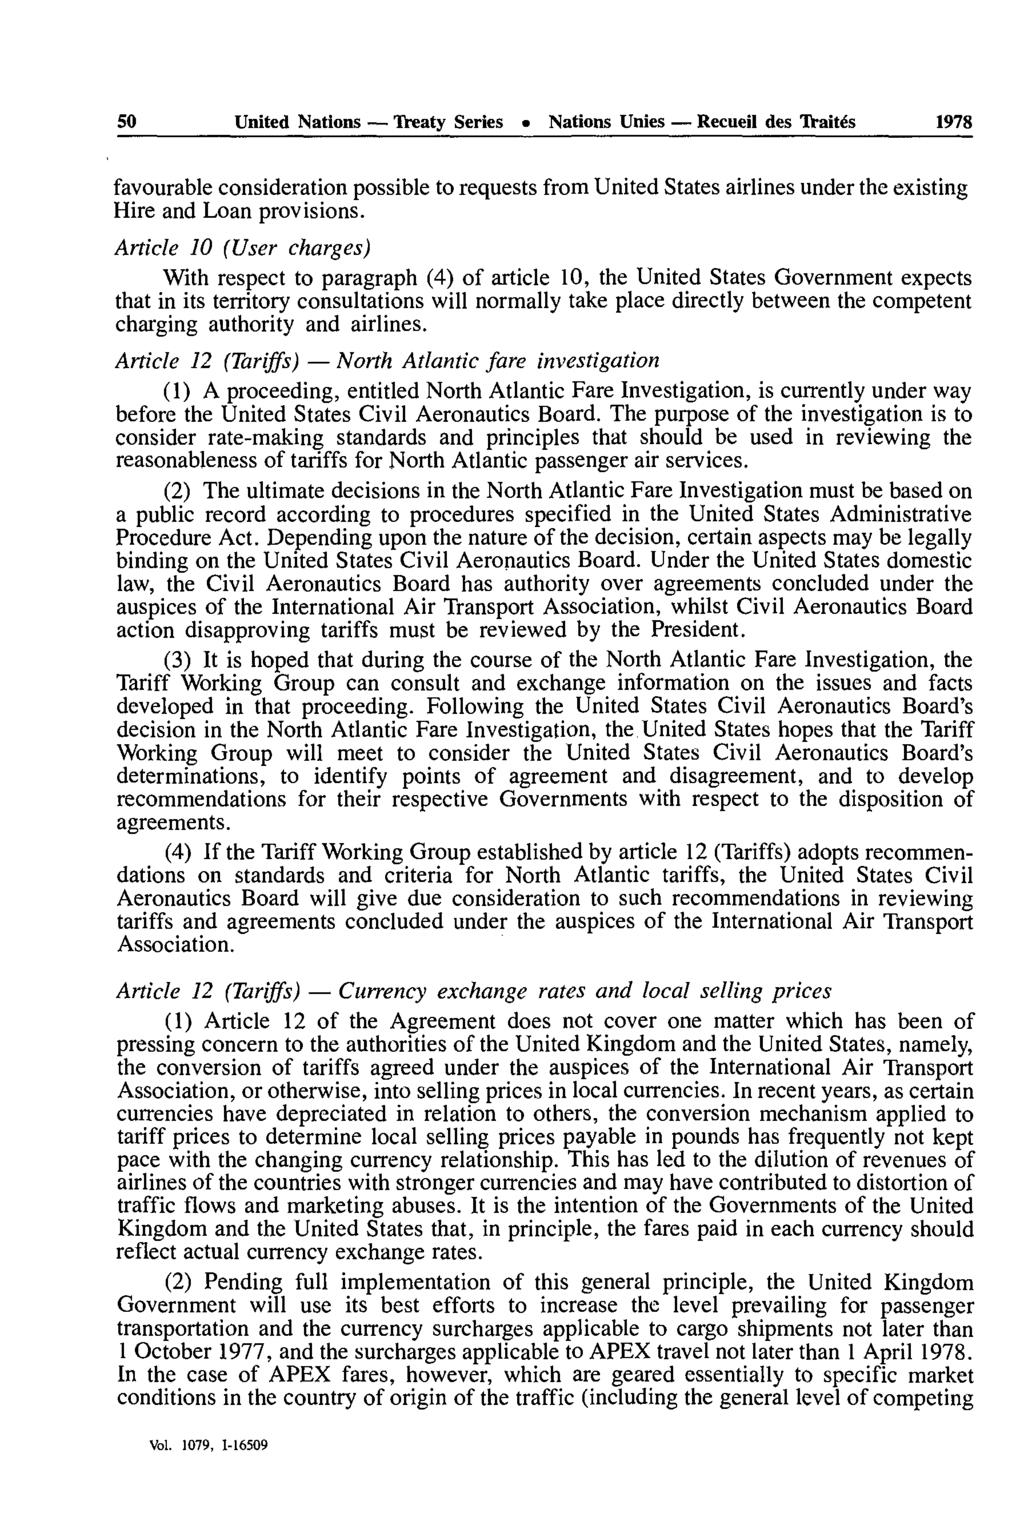 50 United Nations Treaty Series» Nations Unies Recueil des TVaités 1978 favourable consideration possible to requests from United States airlines under the existing Hire and Loan provisions.